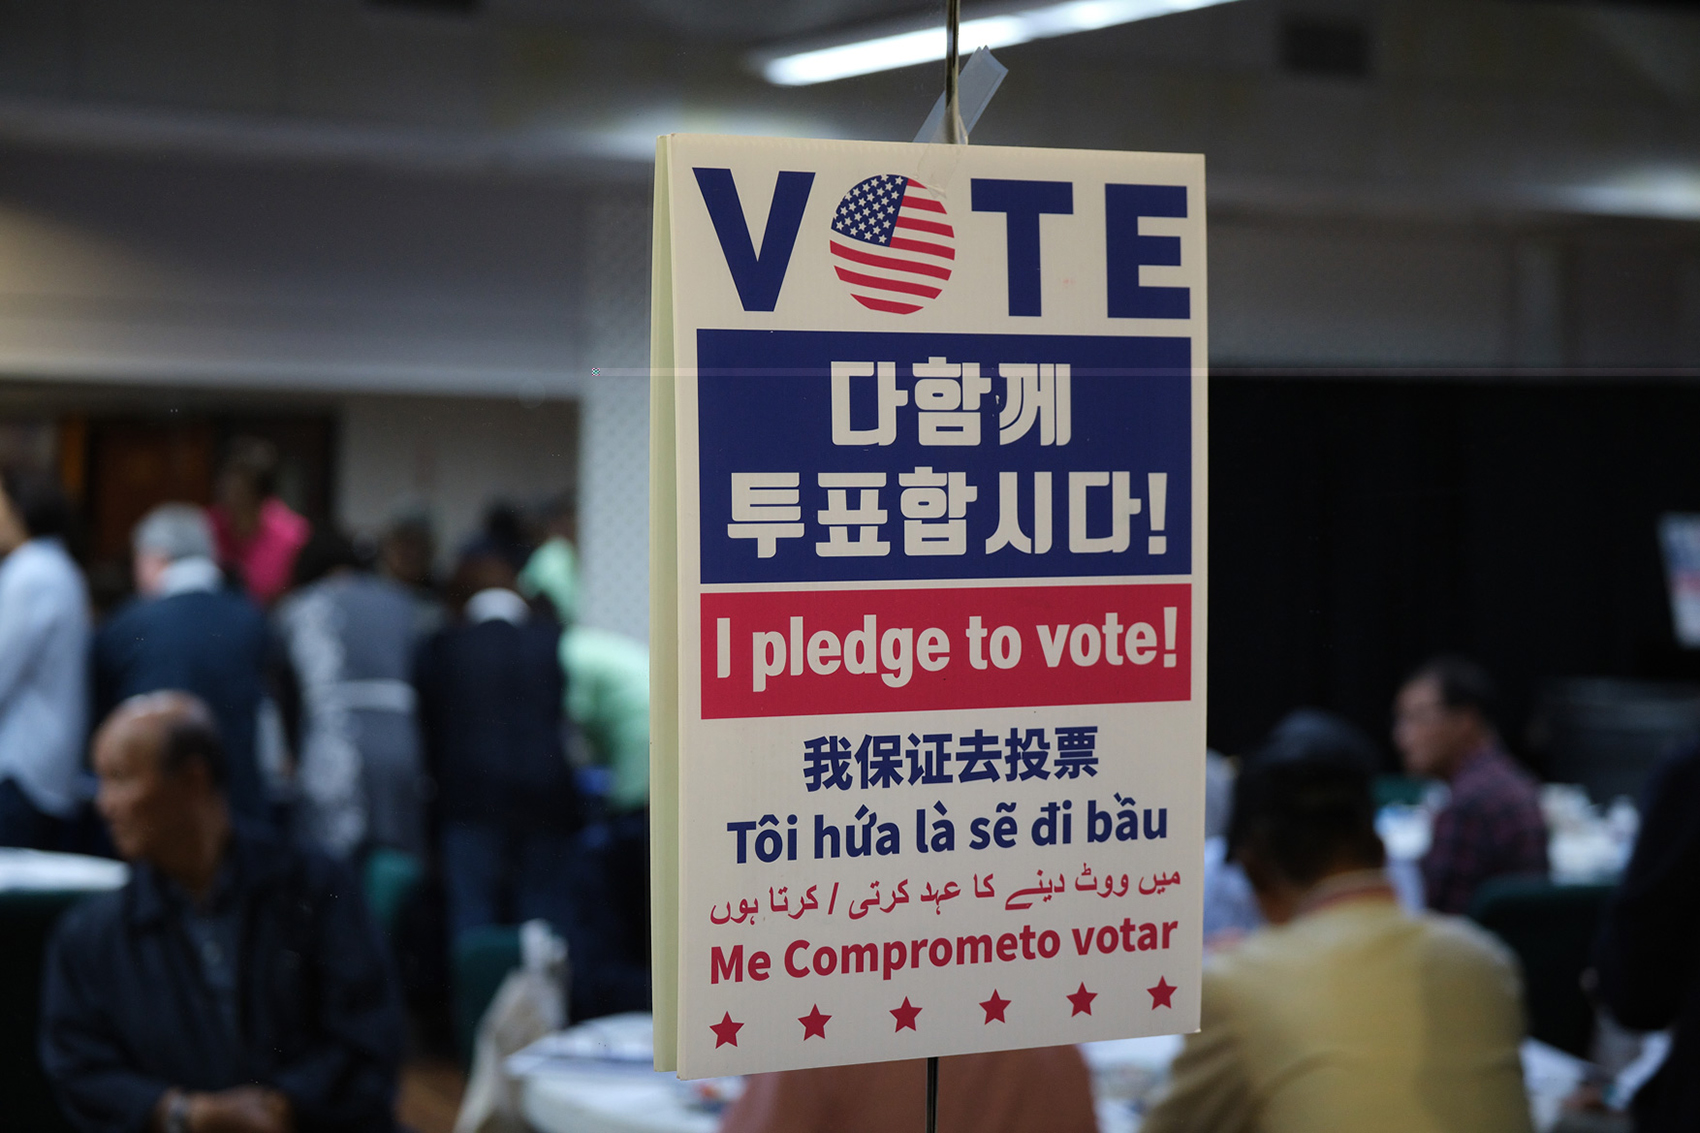 Signage encouraging voting at a voting rights forum at the Korean Community Center